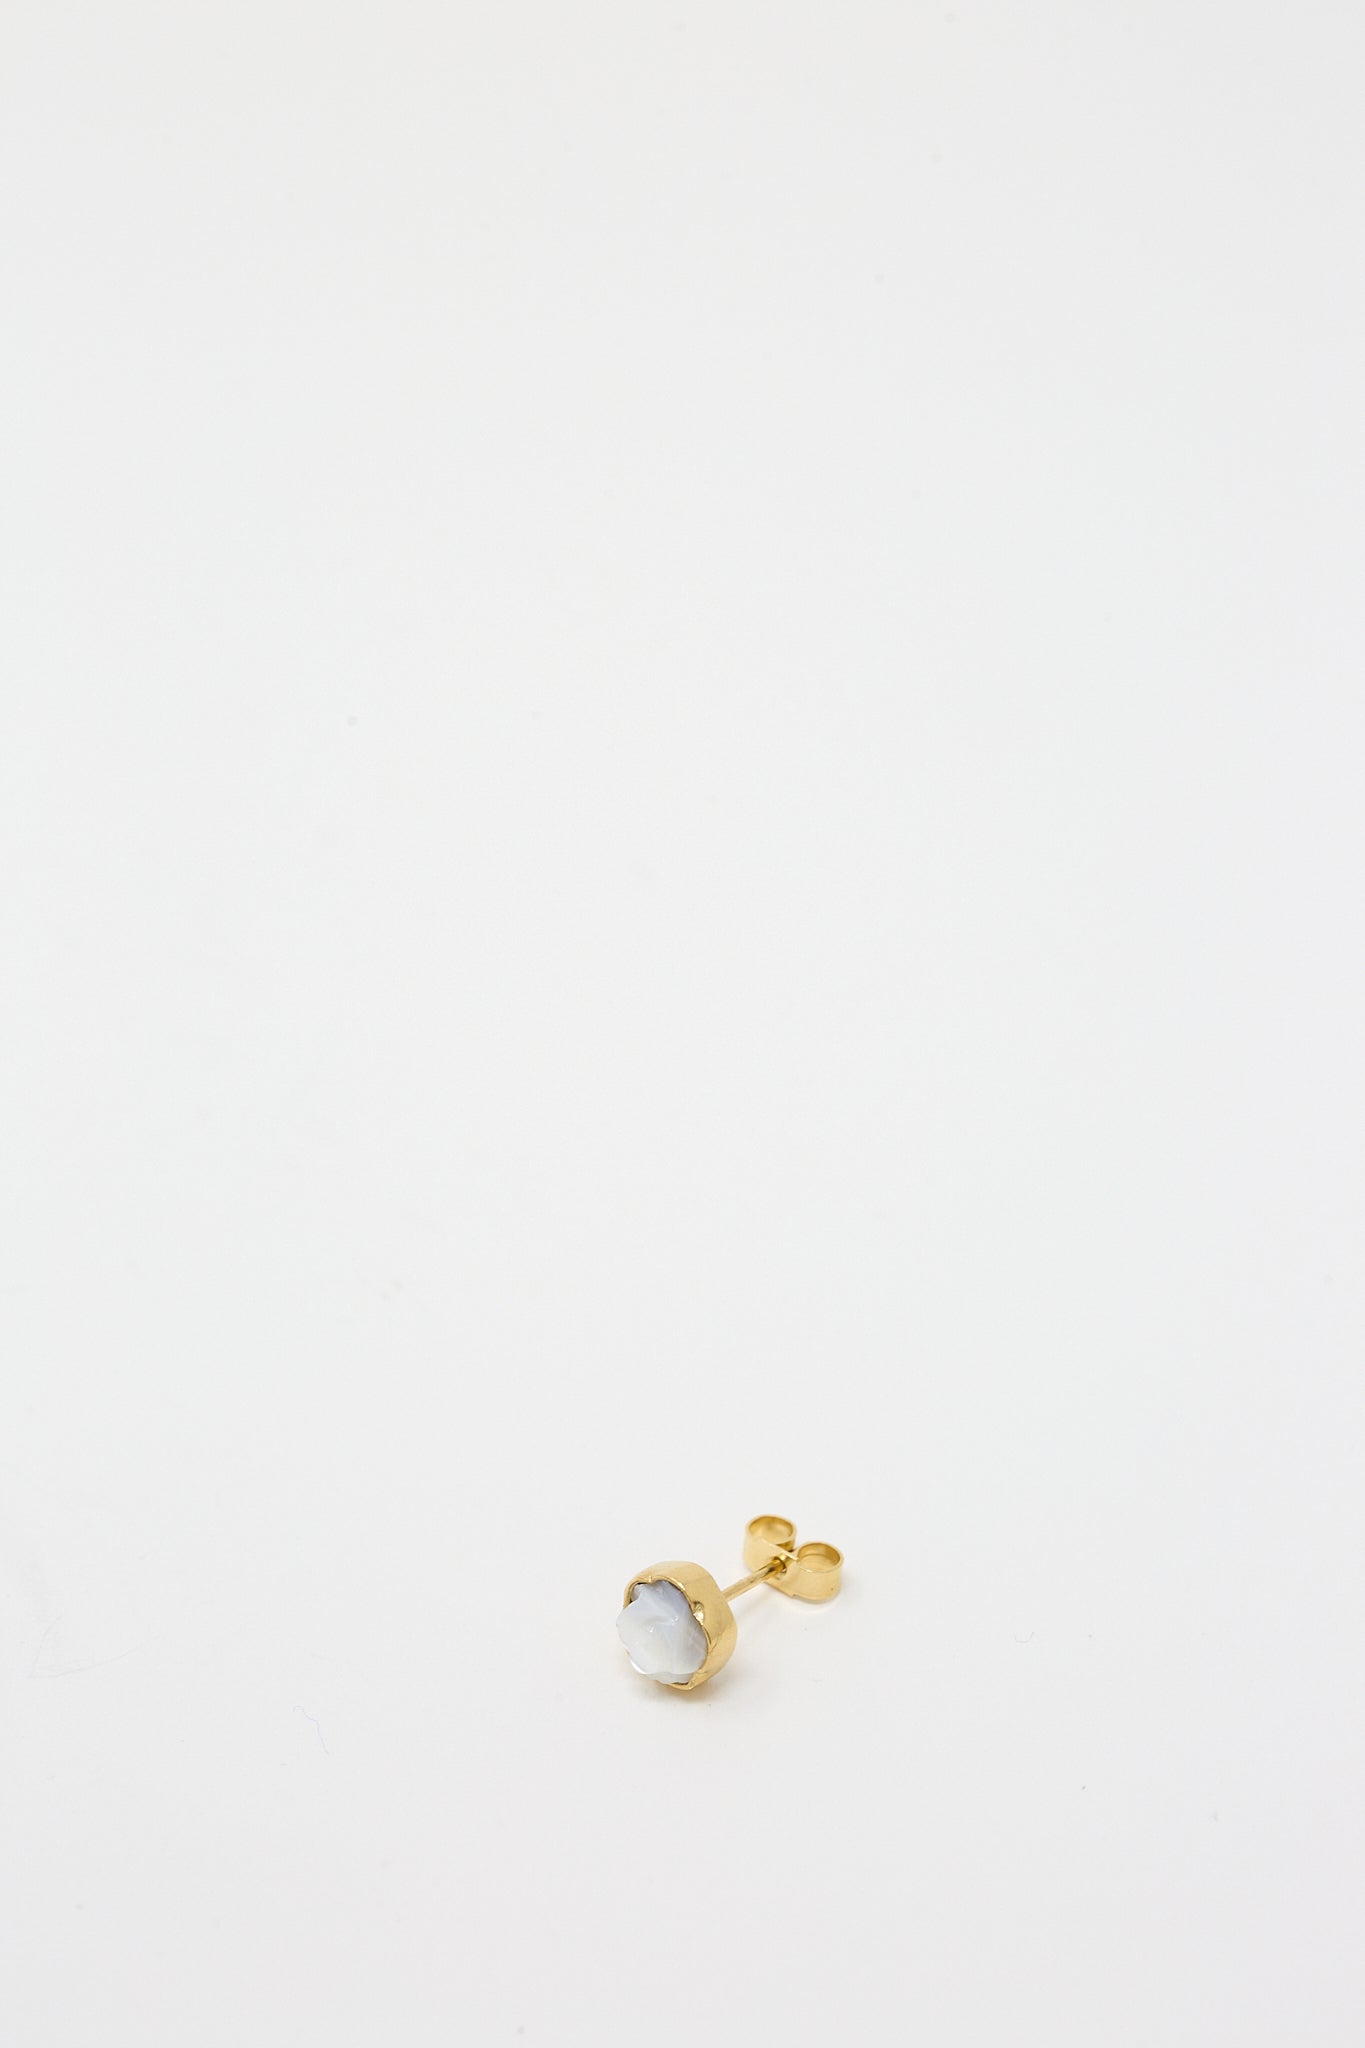 An 18K gold-plated silver Stud Earring in White Flower with a white stone by Grainne Morton.